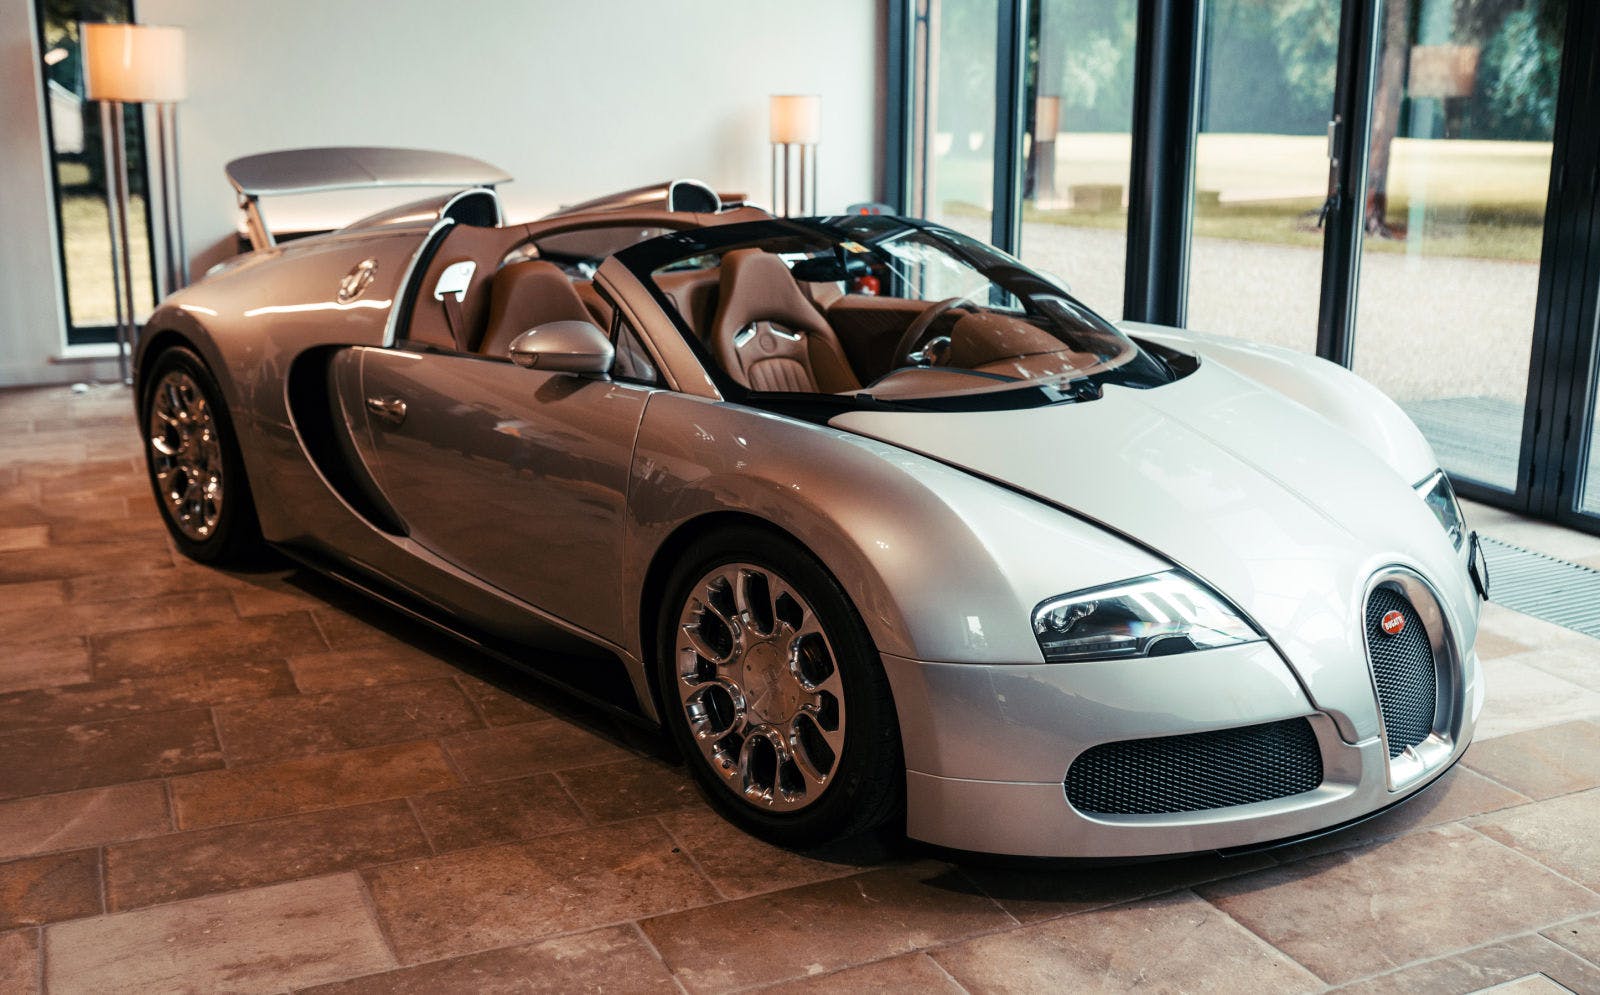 The Veyron 16.4 Grand Sport 2.1 in its original condition: White Silver Metallic paintwork and Cognac leather interior trim.